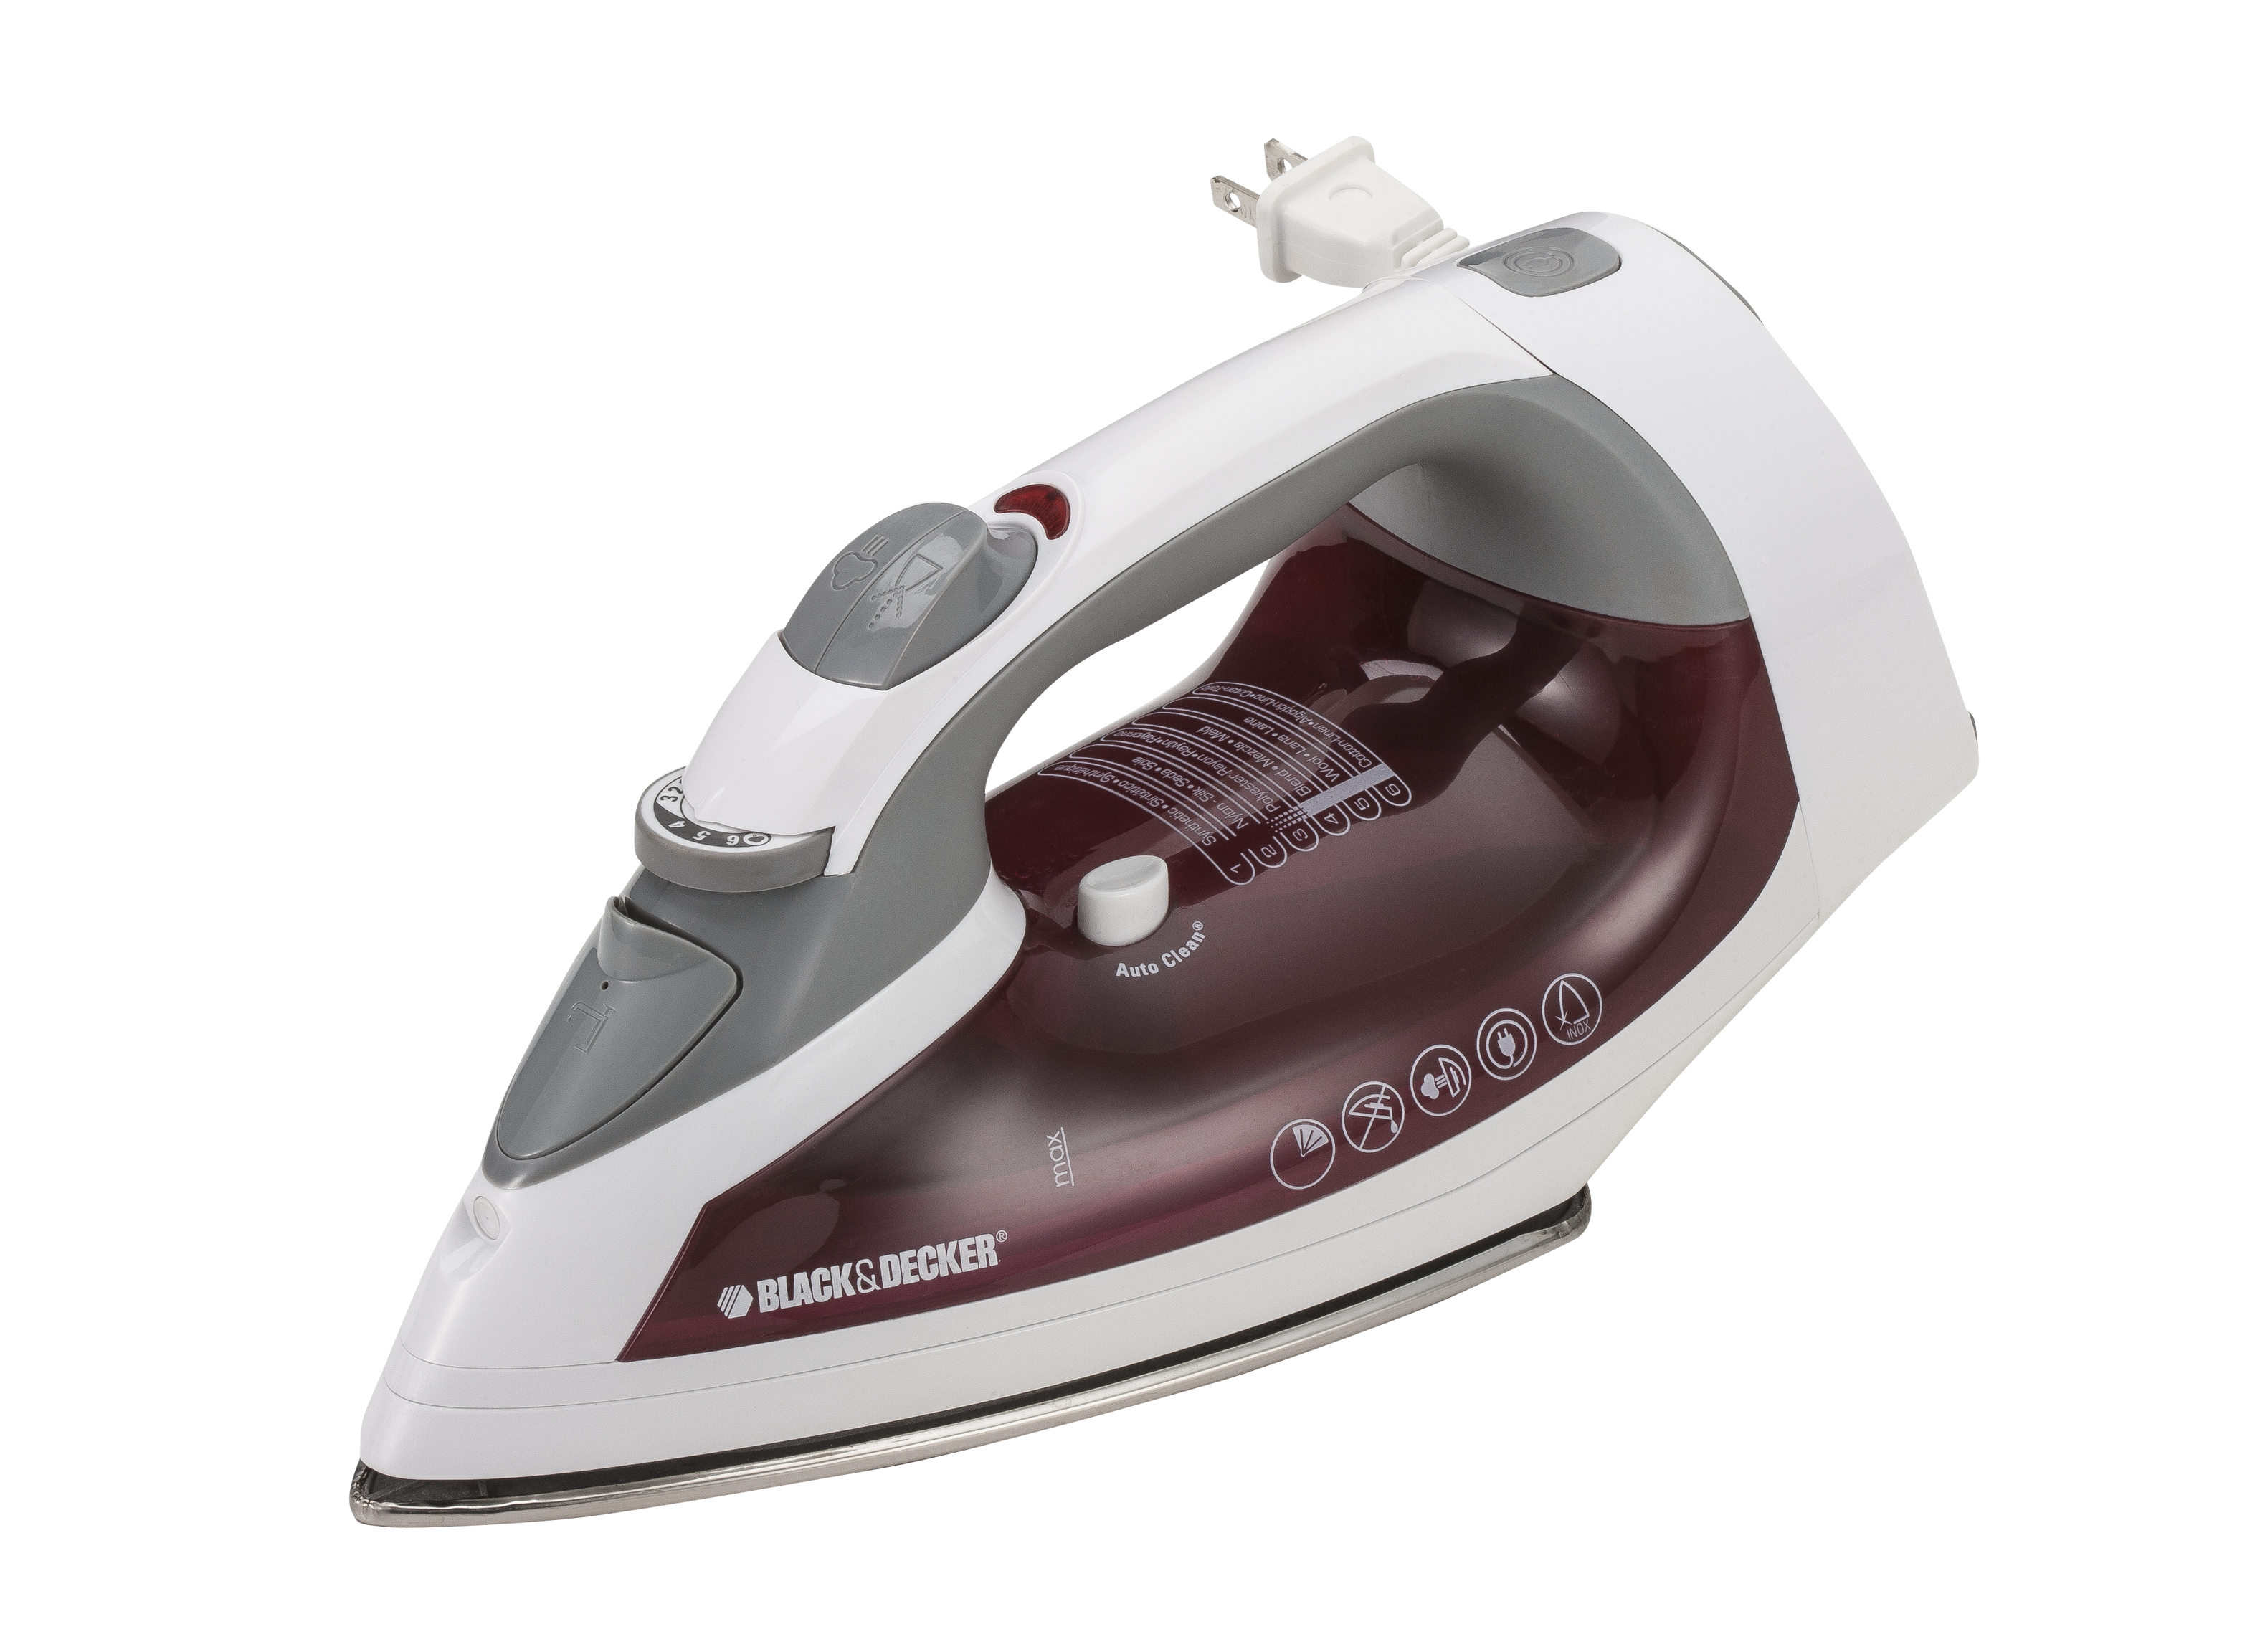 https://crdms.images.consumerreports.org/prod/products/cr/models/269018-steamirons-blackdecker-xpresssteamcordreelicr07x.png